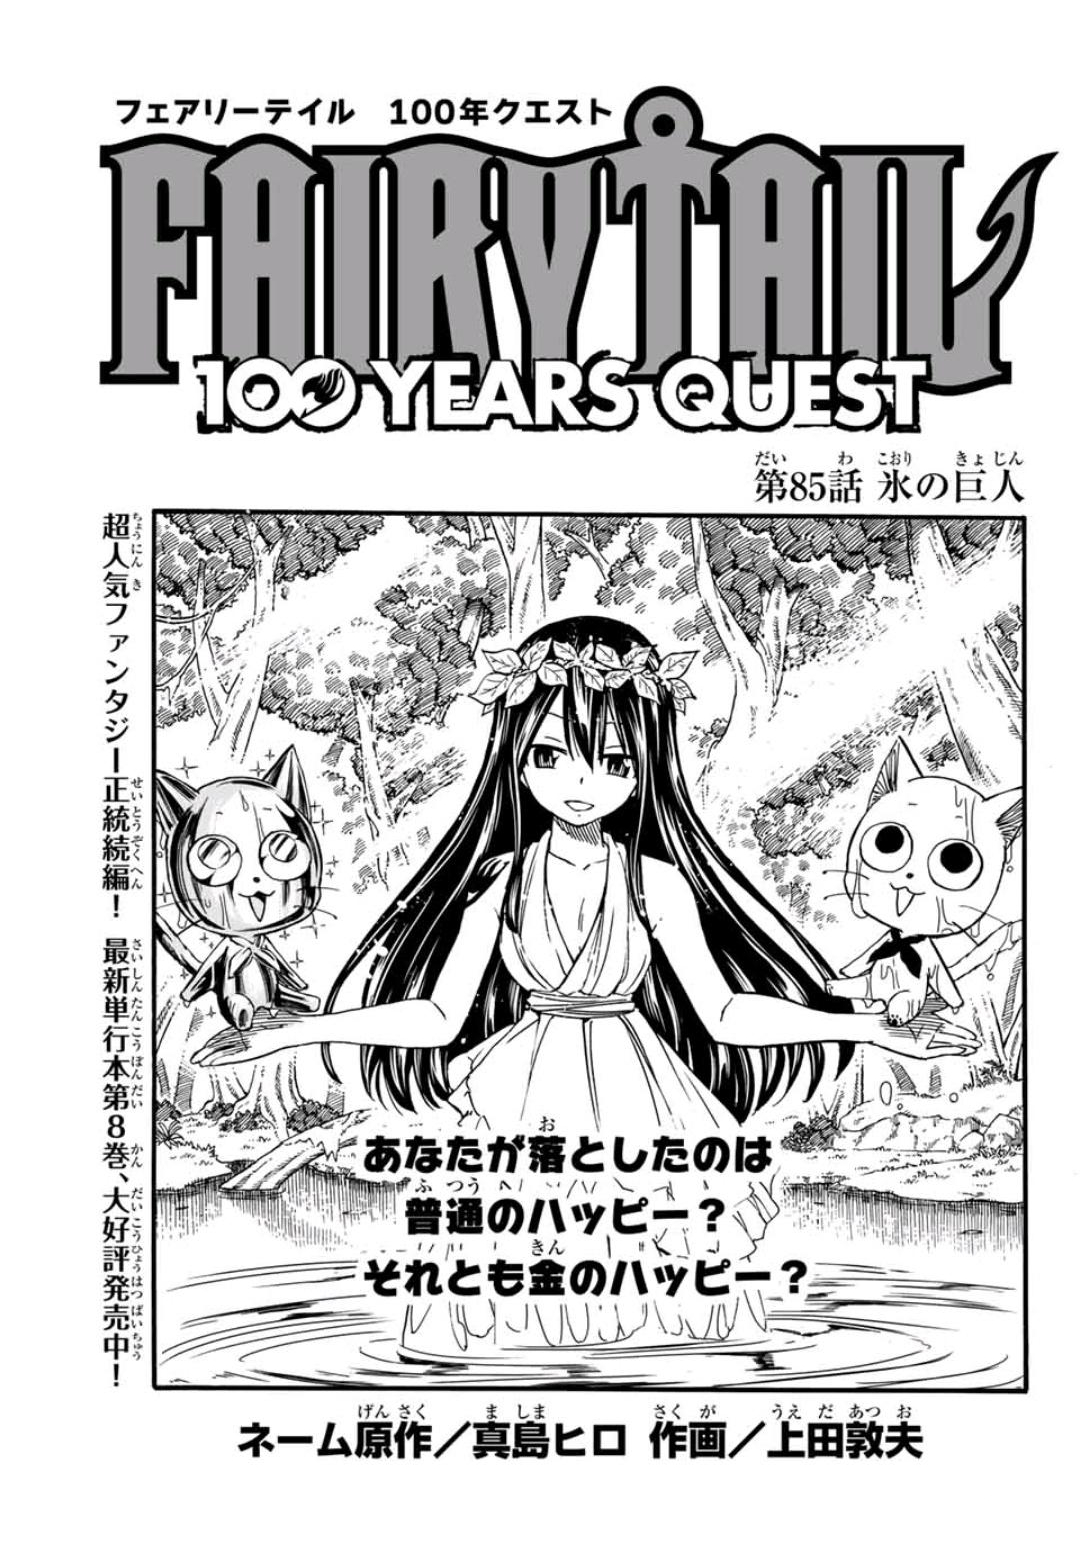 Fairy Tail: 100 Years Quest Chapter 85 | Fairy Tail Wiki | Fandom